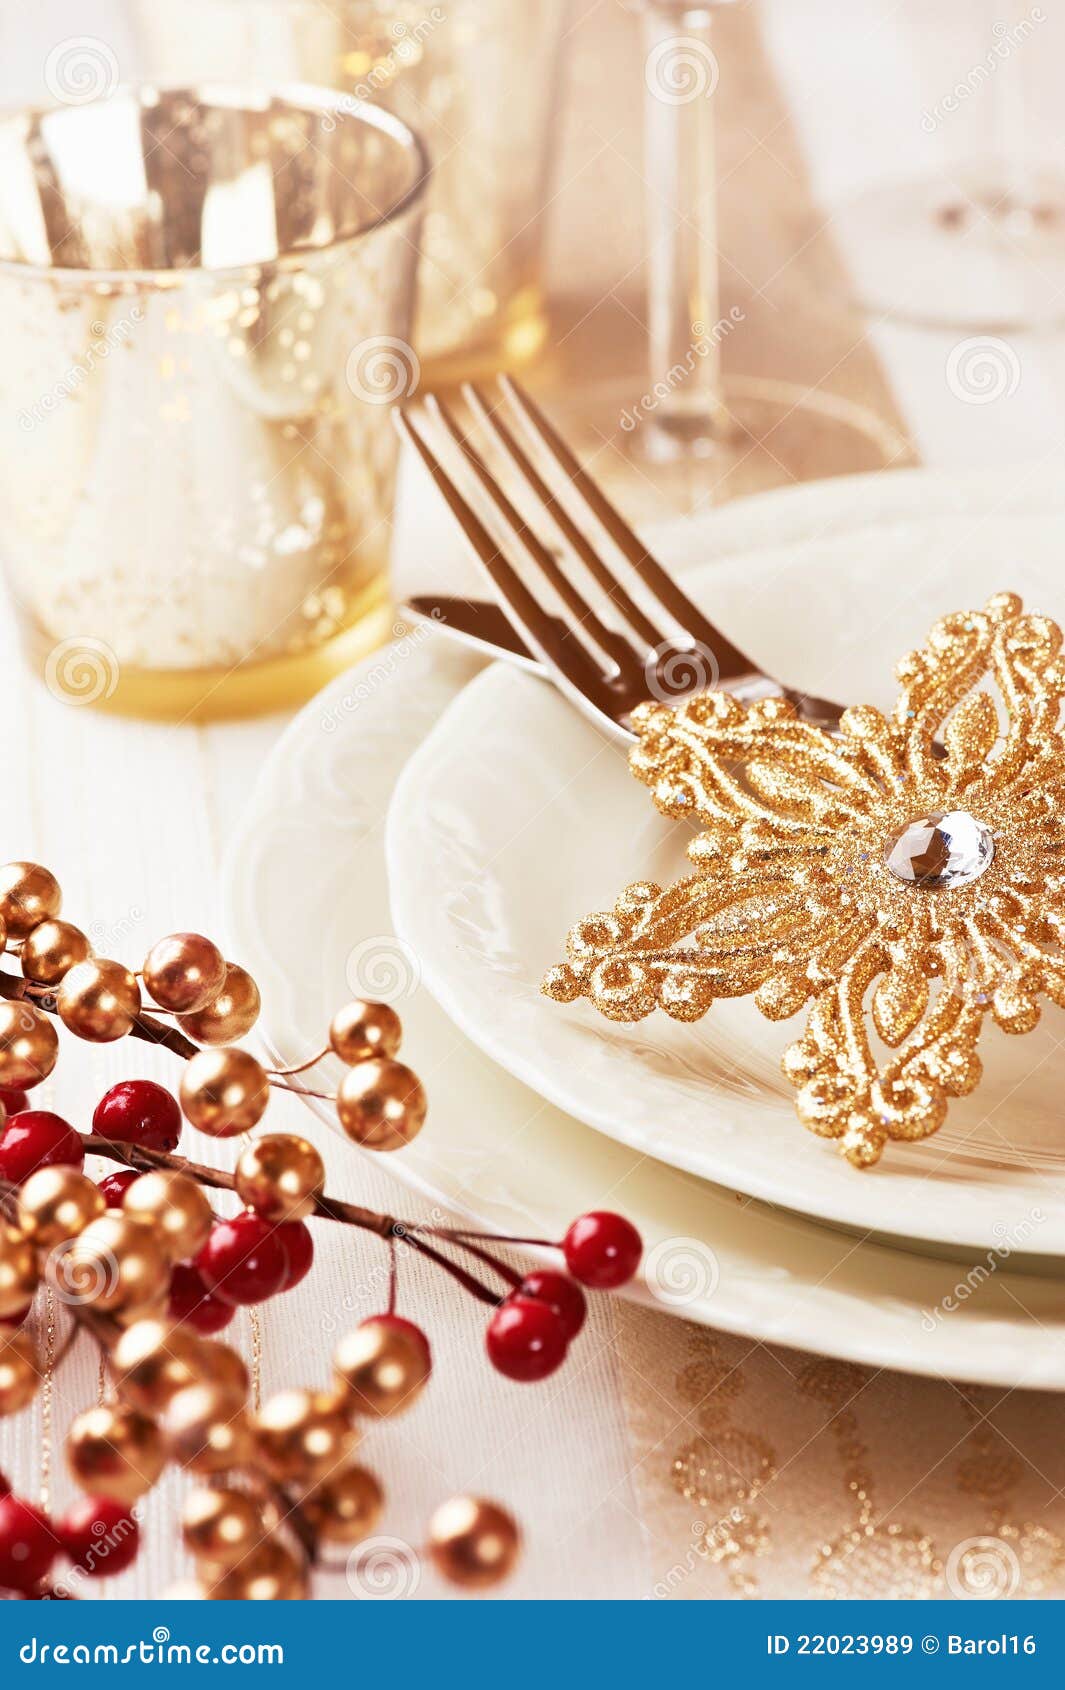 Christmas Place Setting Royalty Free Stock Images - Image: 22023989